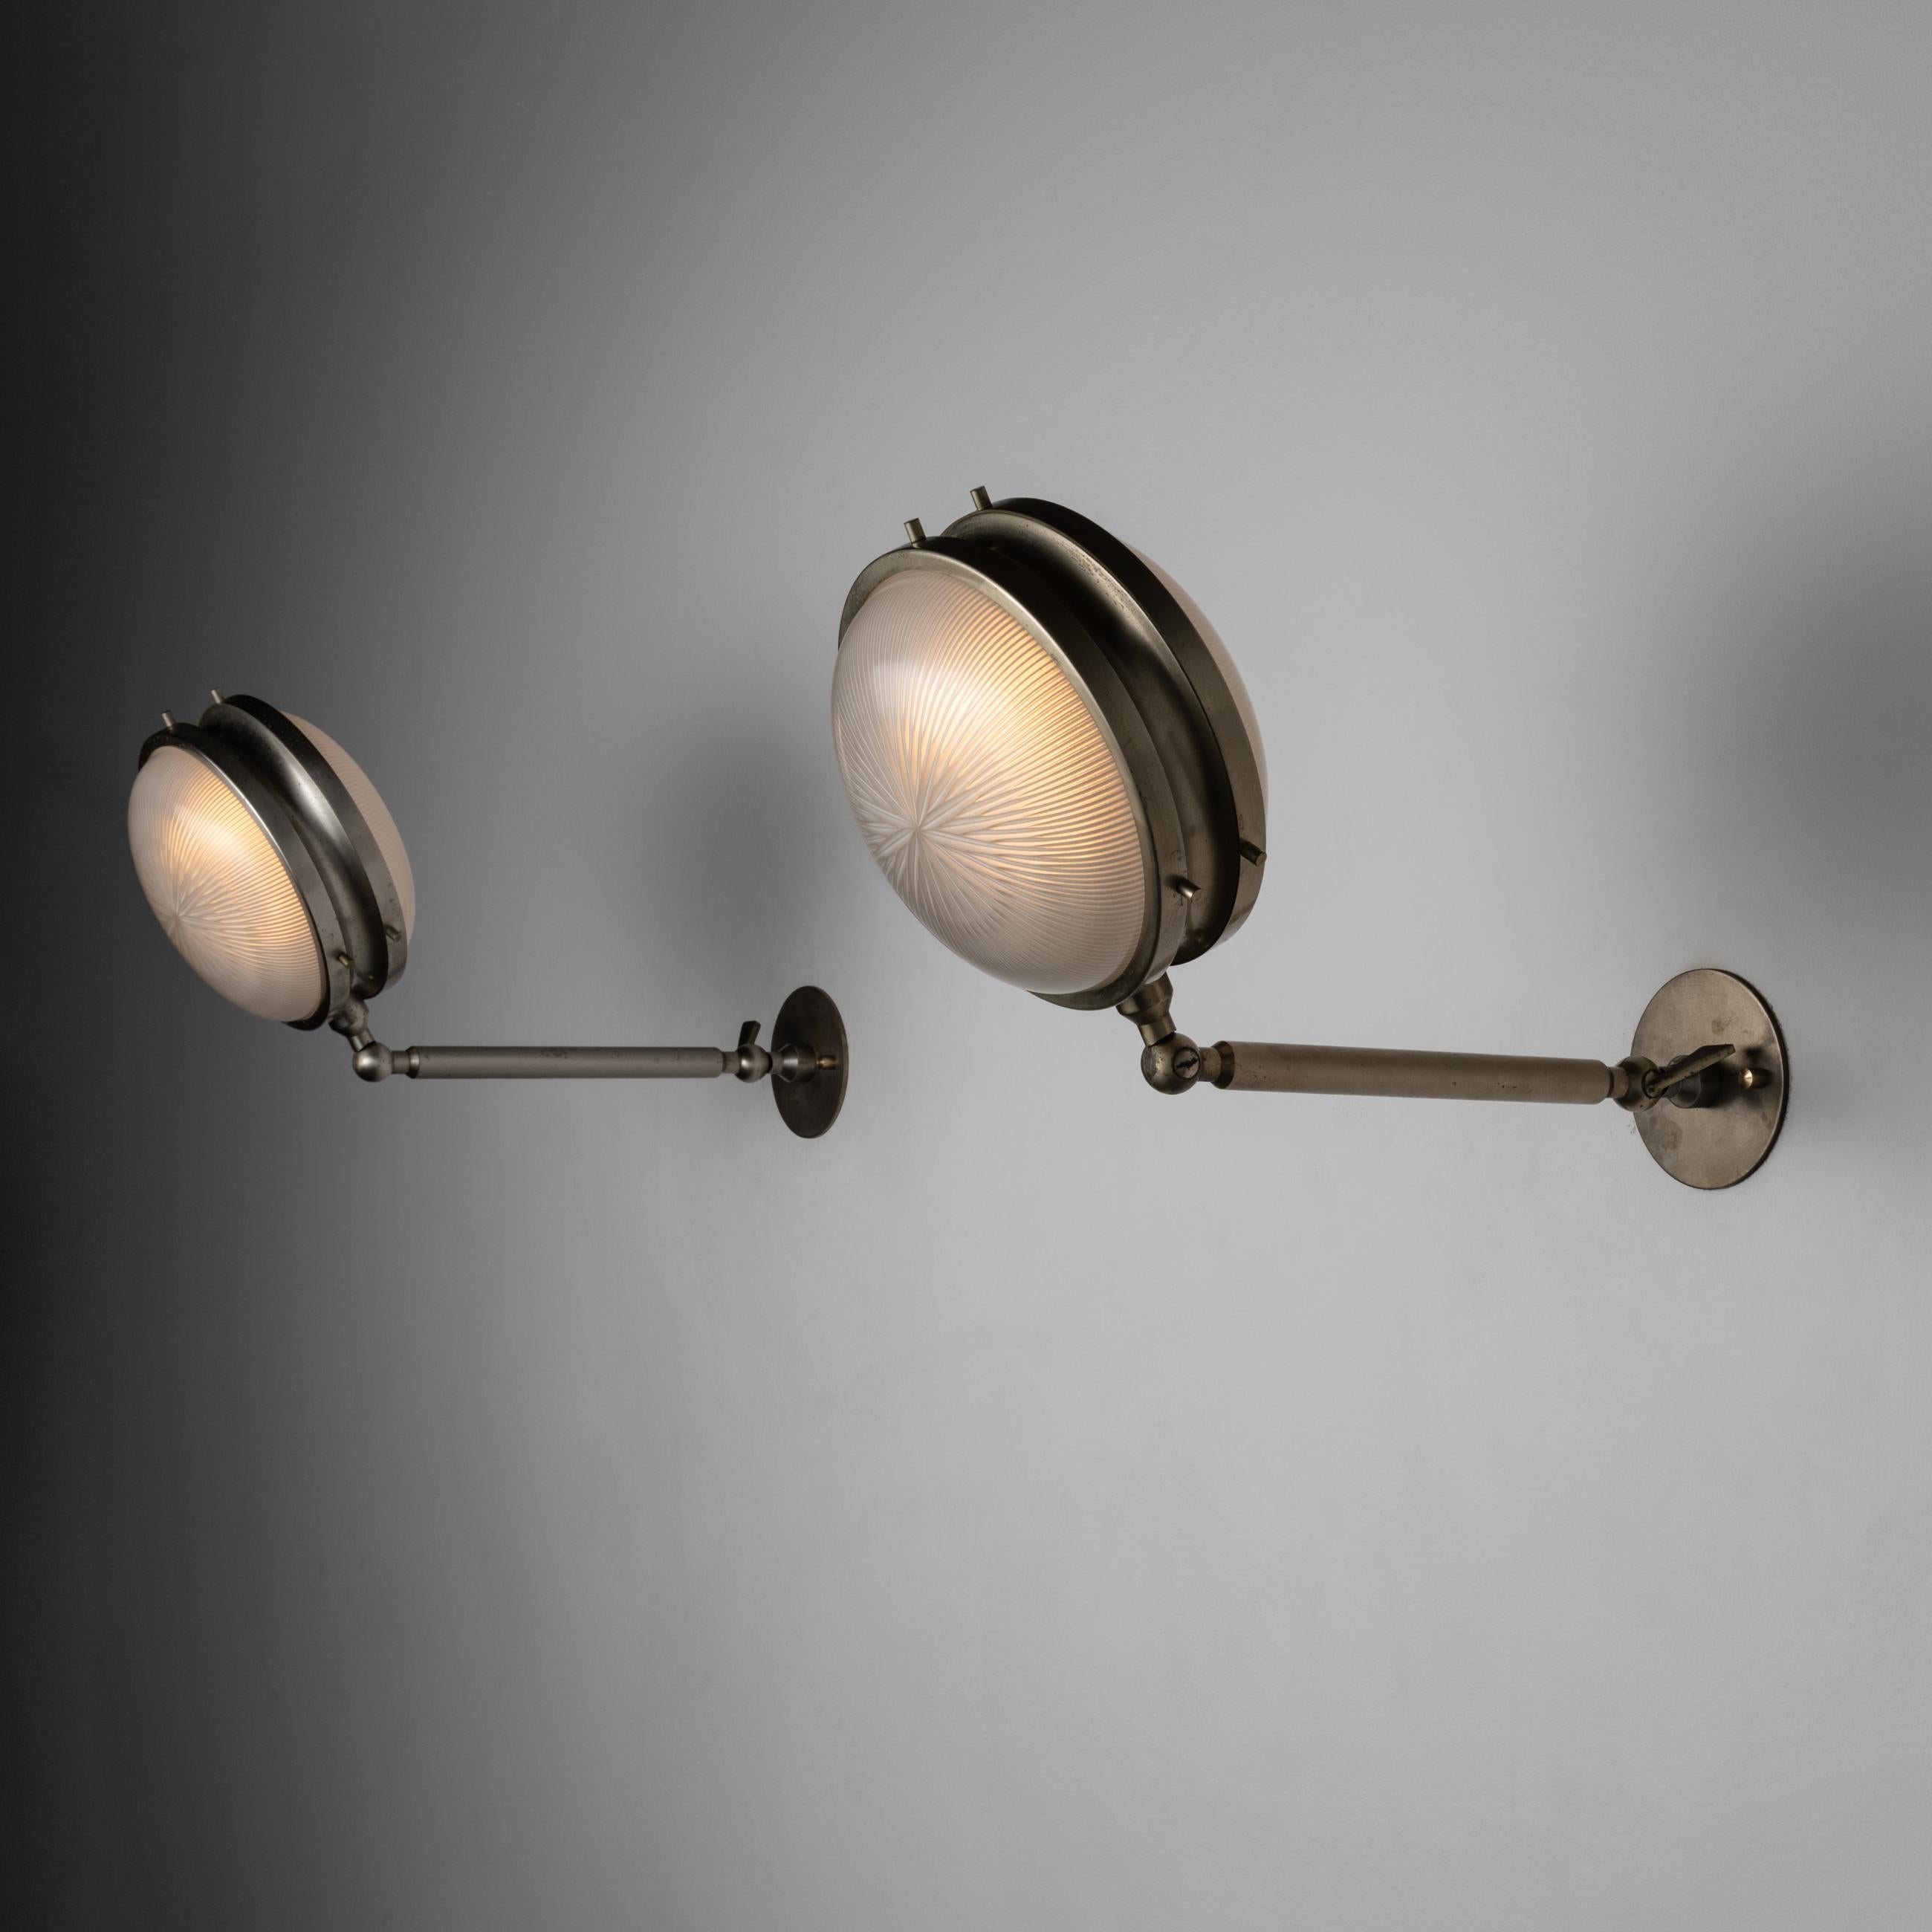 Pair of “Gamma” Sconces by: Sergio Mazza for Artemide. Designed and manufactured in Italy, circa 1960's. Brass, glass. Rewired for U.S. standards. Arms adjust to various heights. We recommend one e27 40w maximum bulb per fixture. Bulbs not included.